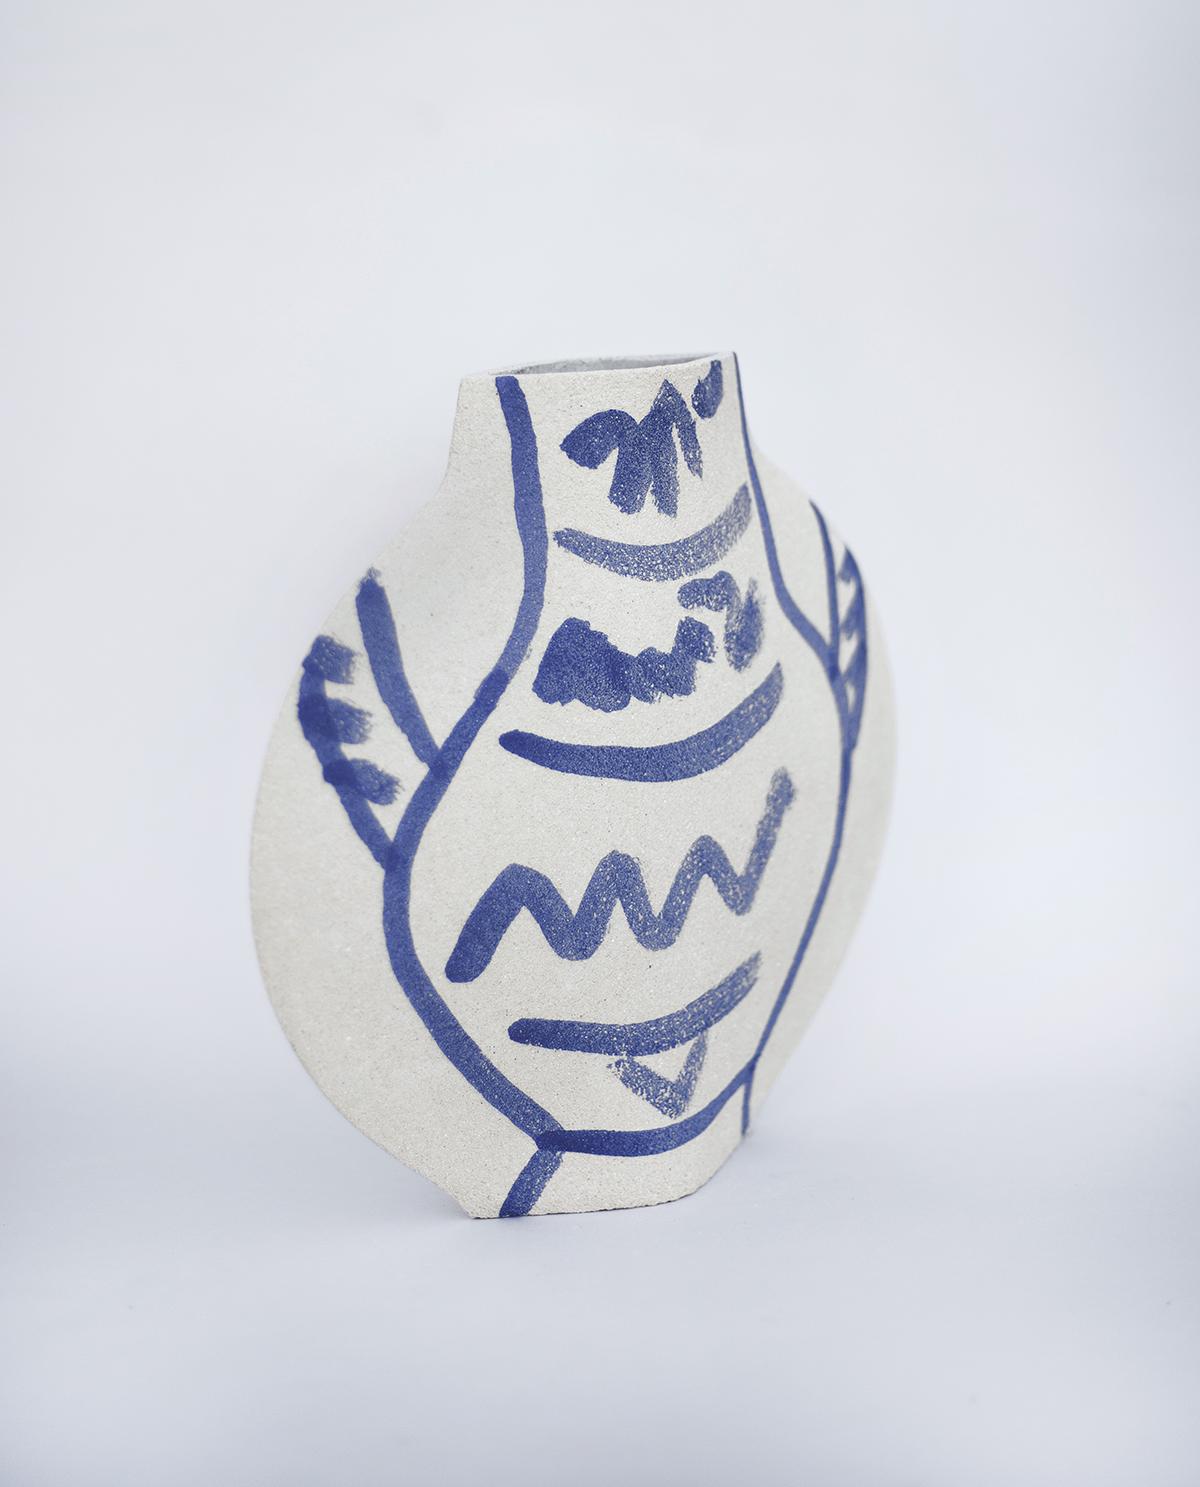 ‘Lune [M] - Blue Pattern' ceramic vase.

This vase is part of a new series inspired by iconic Art (and more precisely paintings) movements. Here is our LUNE [M] model with blue slip motifs based on abstract paintings. They are applied to the vase